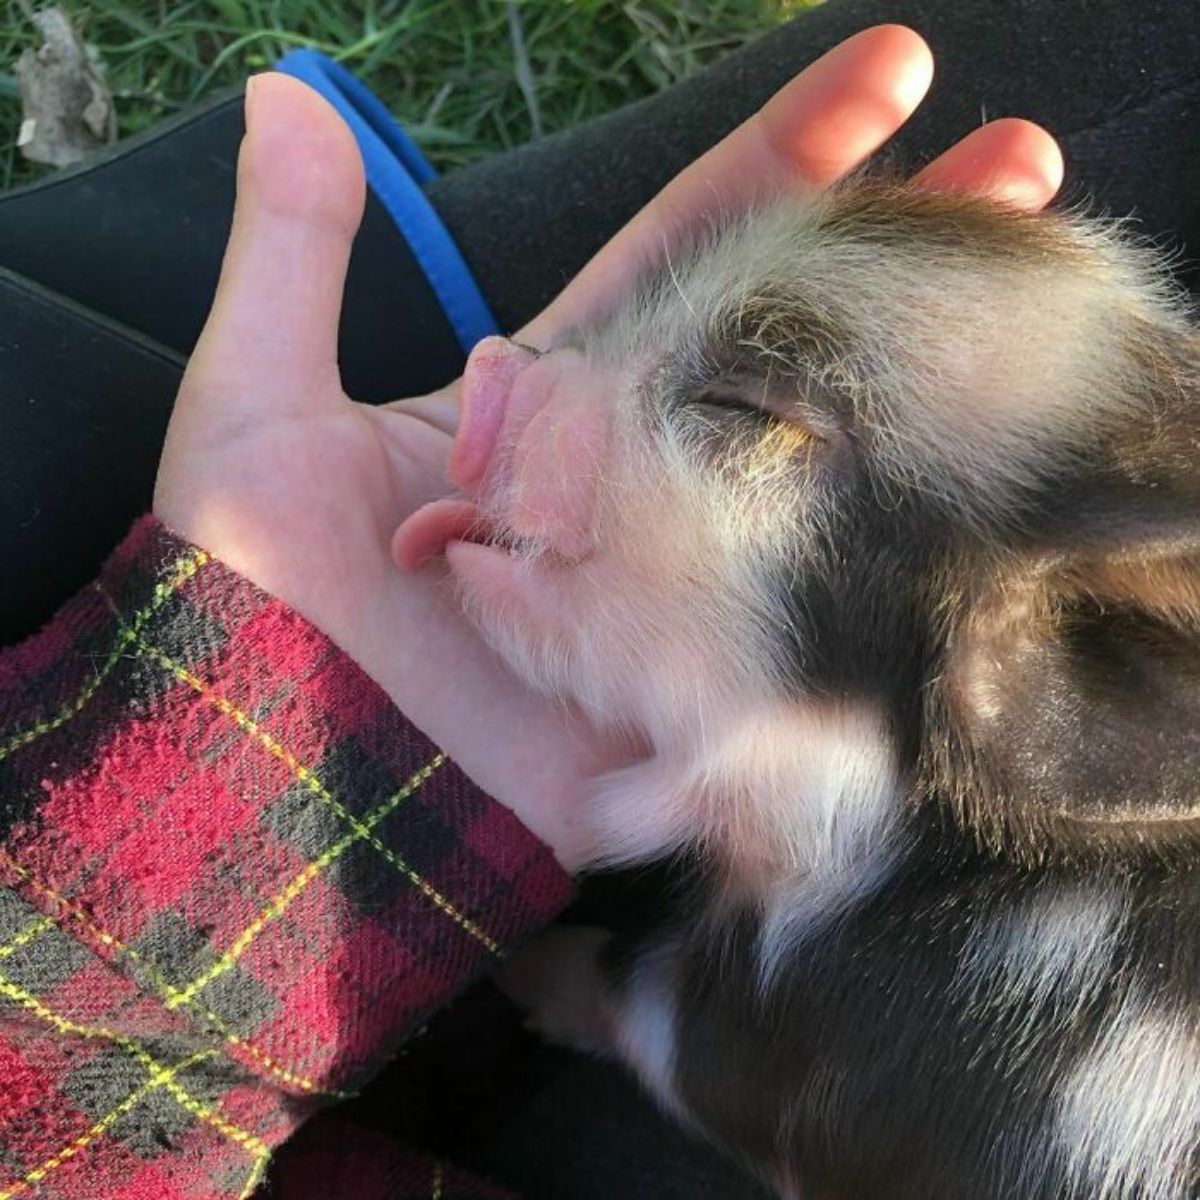 black and white piglet licking someone's open palm